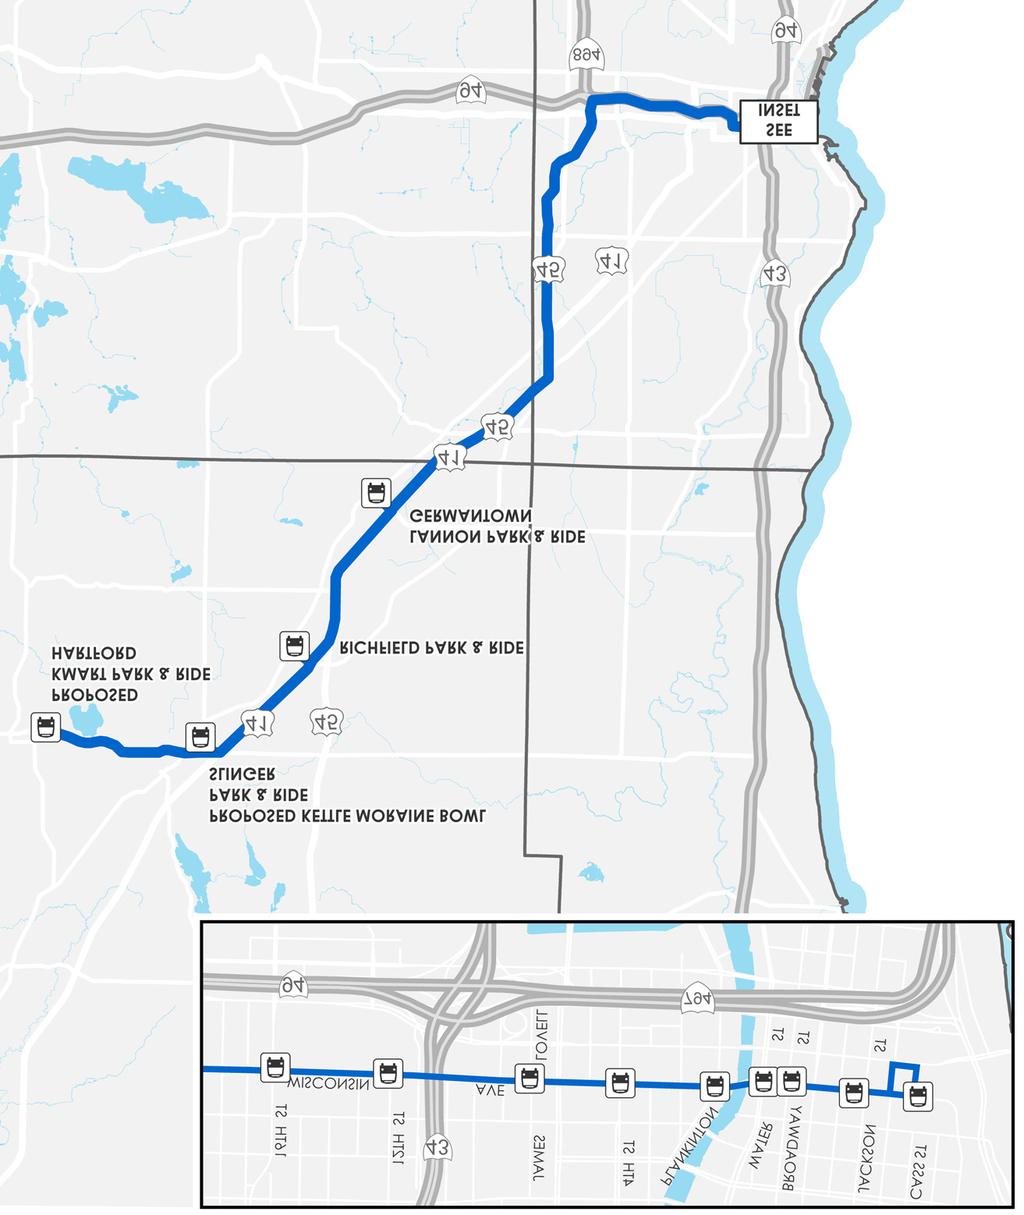 Commuter Express Service to Fond du Lac This alternative would connect West Bend and Kewaskum with Fond du Lac Transit at its downtown transfer zone, and provide direct service to UW-Fond du Lac,